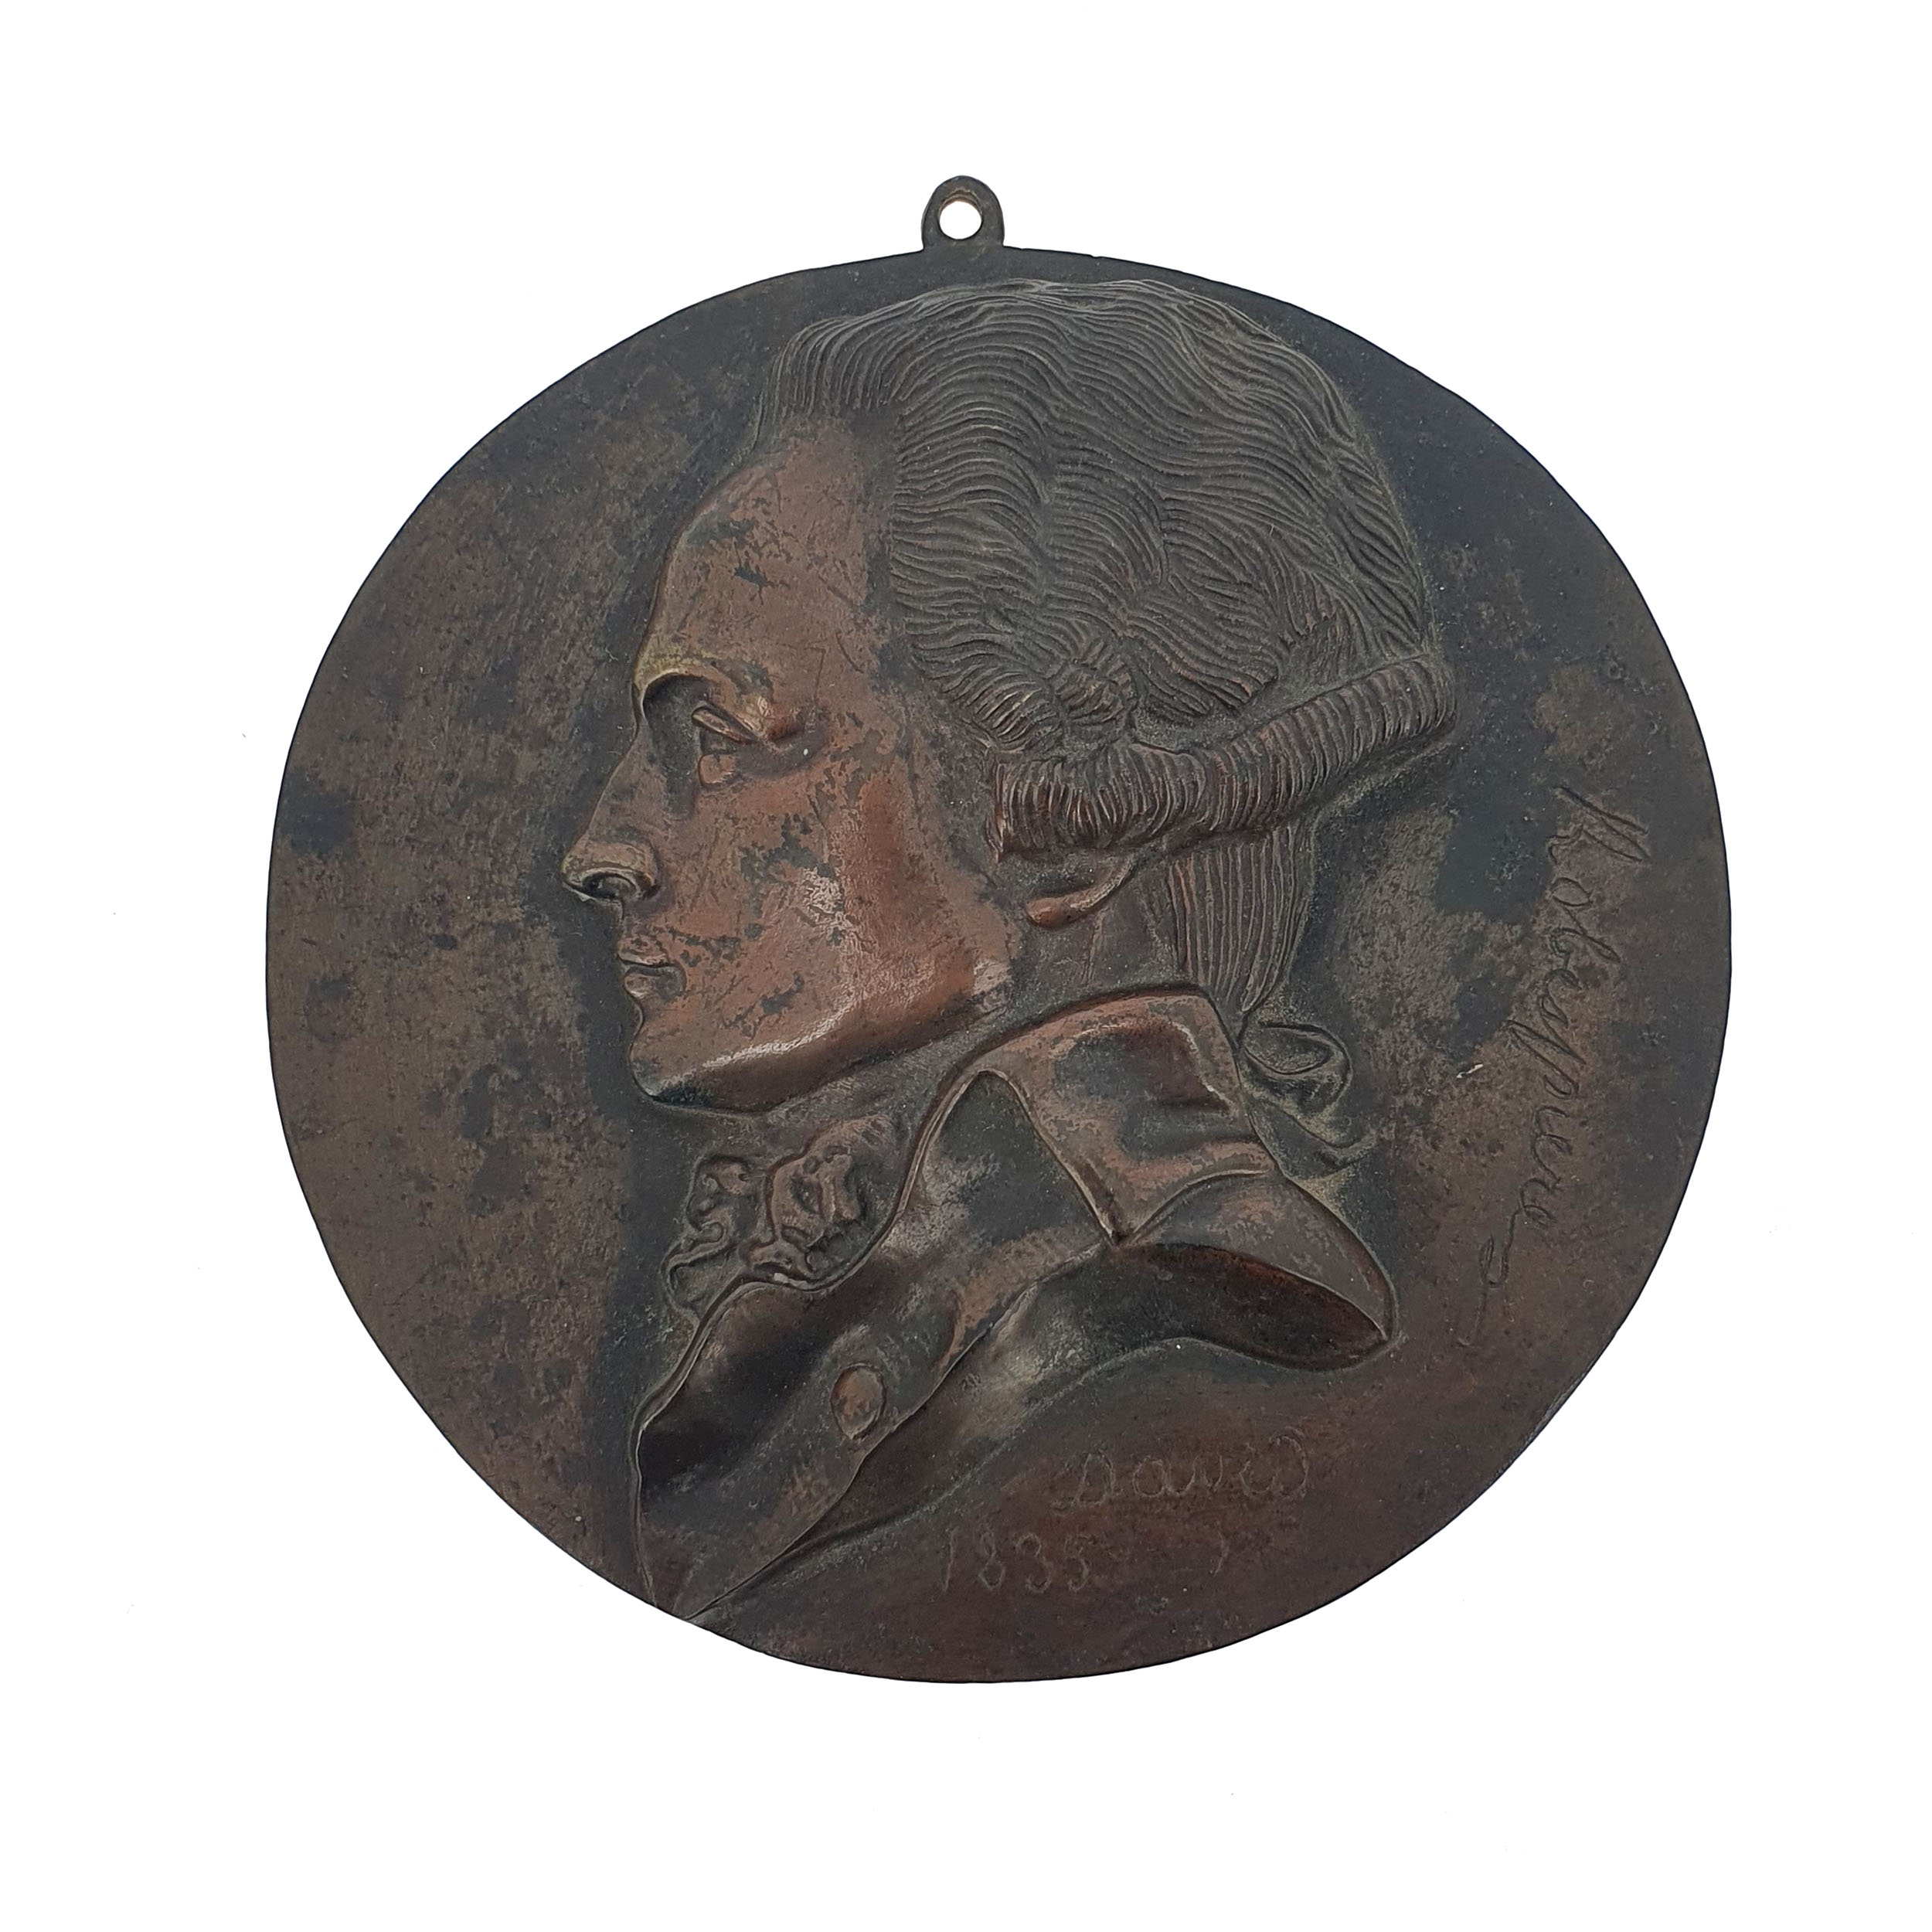 Profile of Robespierre by Pierre Jean David d'Angers, dated 1835